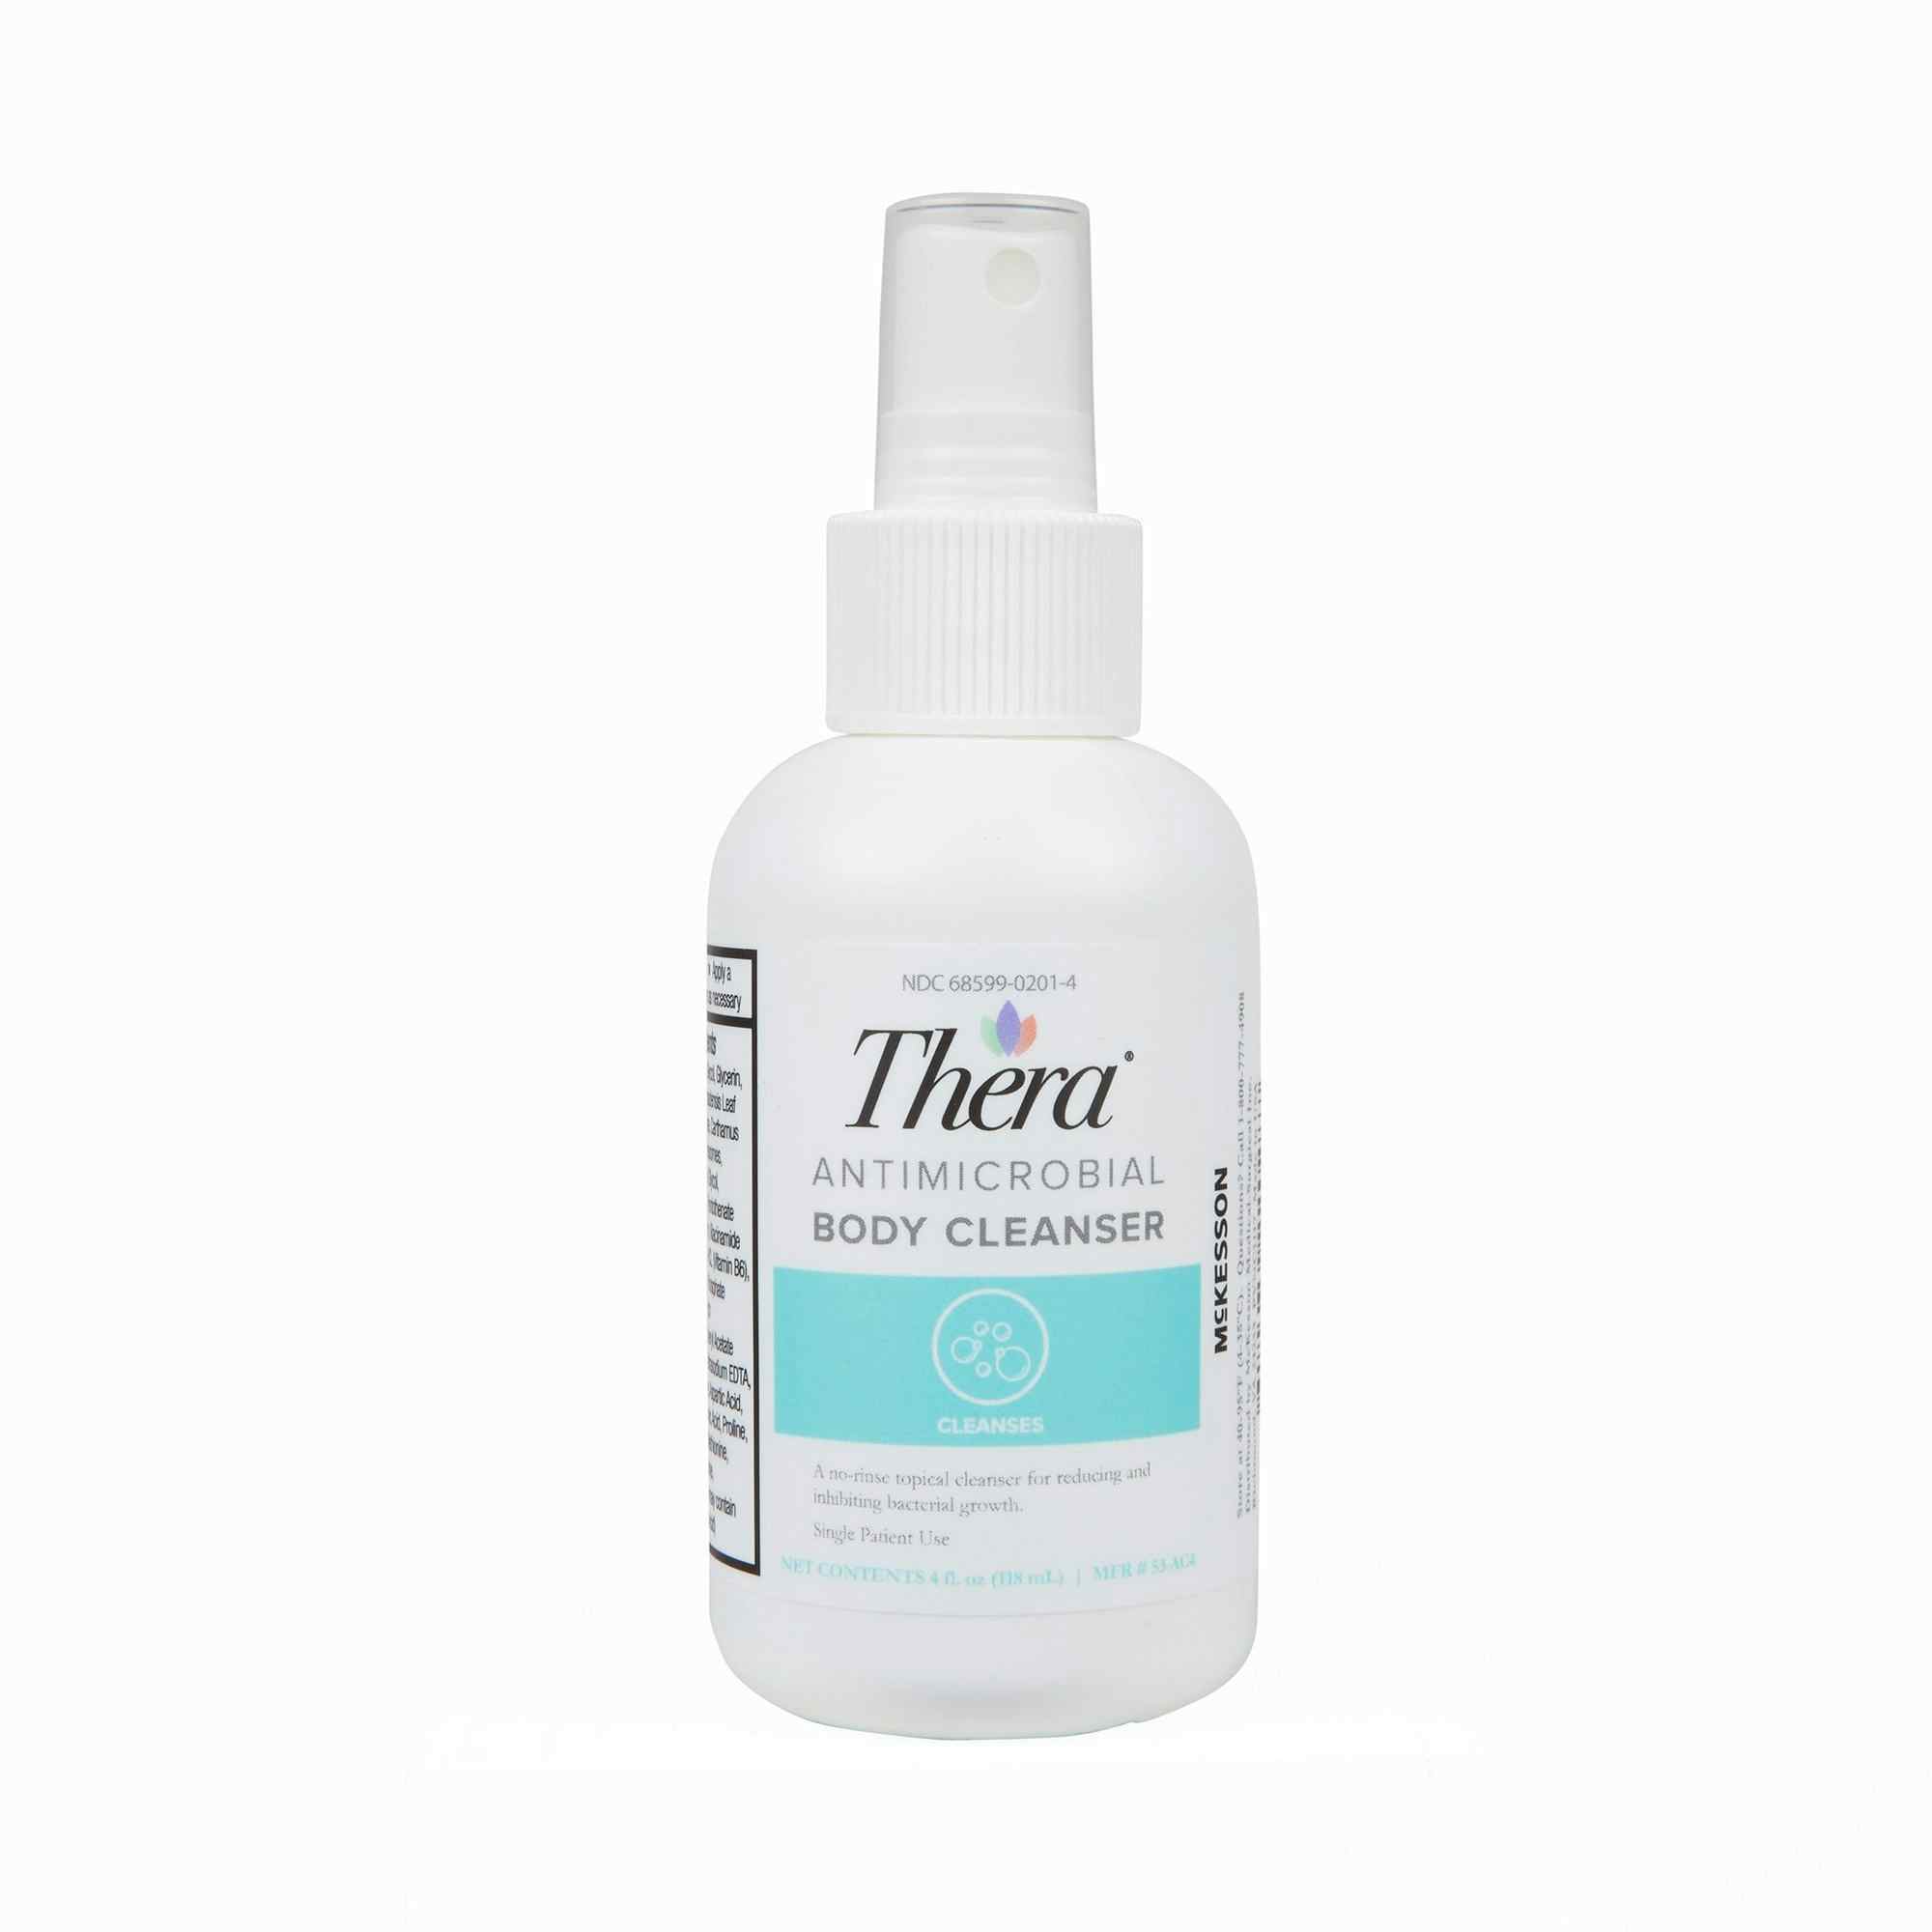 Thera Antimicrobial Body Wash, Scented, 53-AC4, 4 oz. - Case of 24